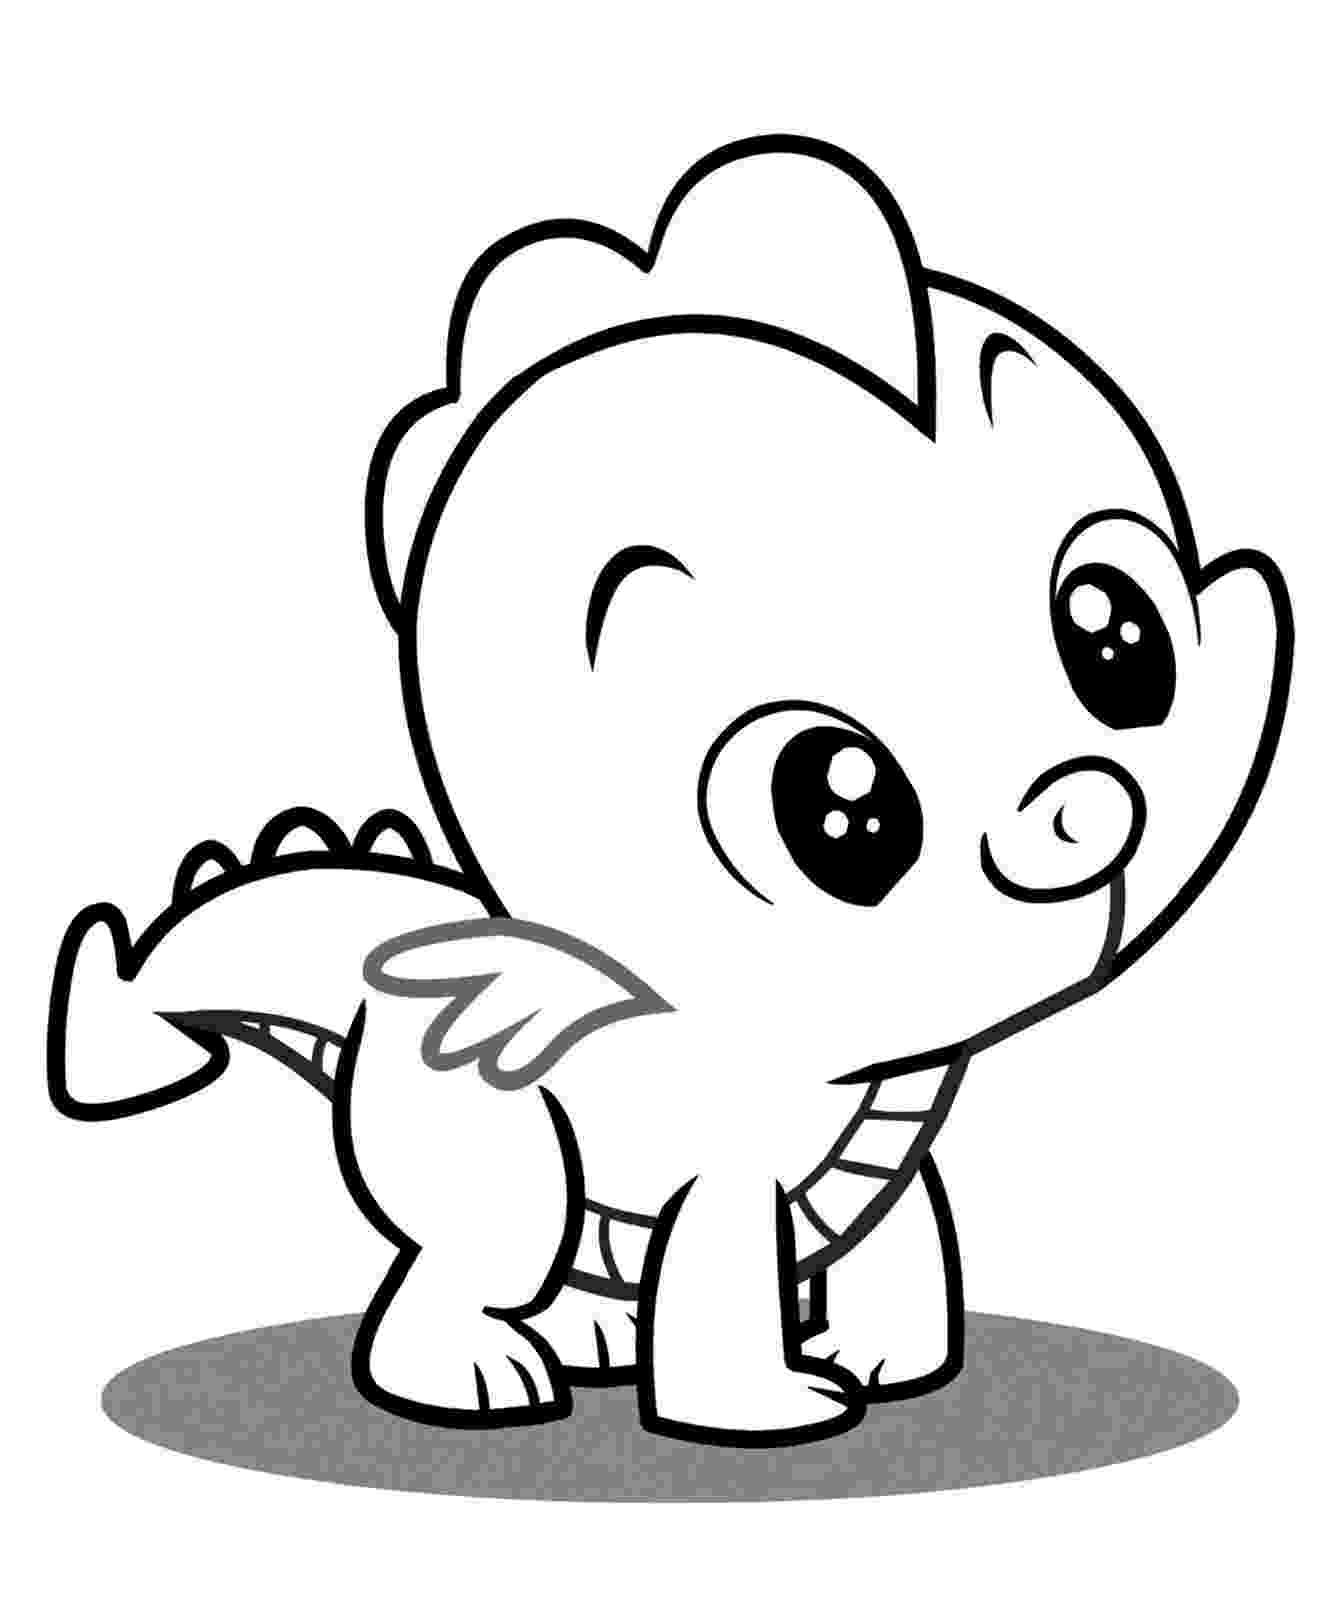 my little pony baby coloring pages baby little pony coloring pages my little pony car pages baby my pony little coloring 